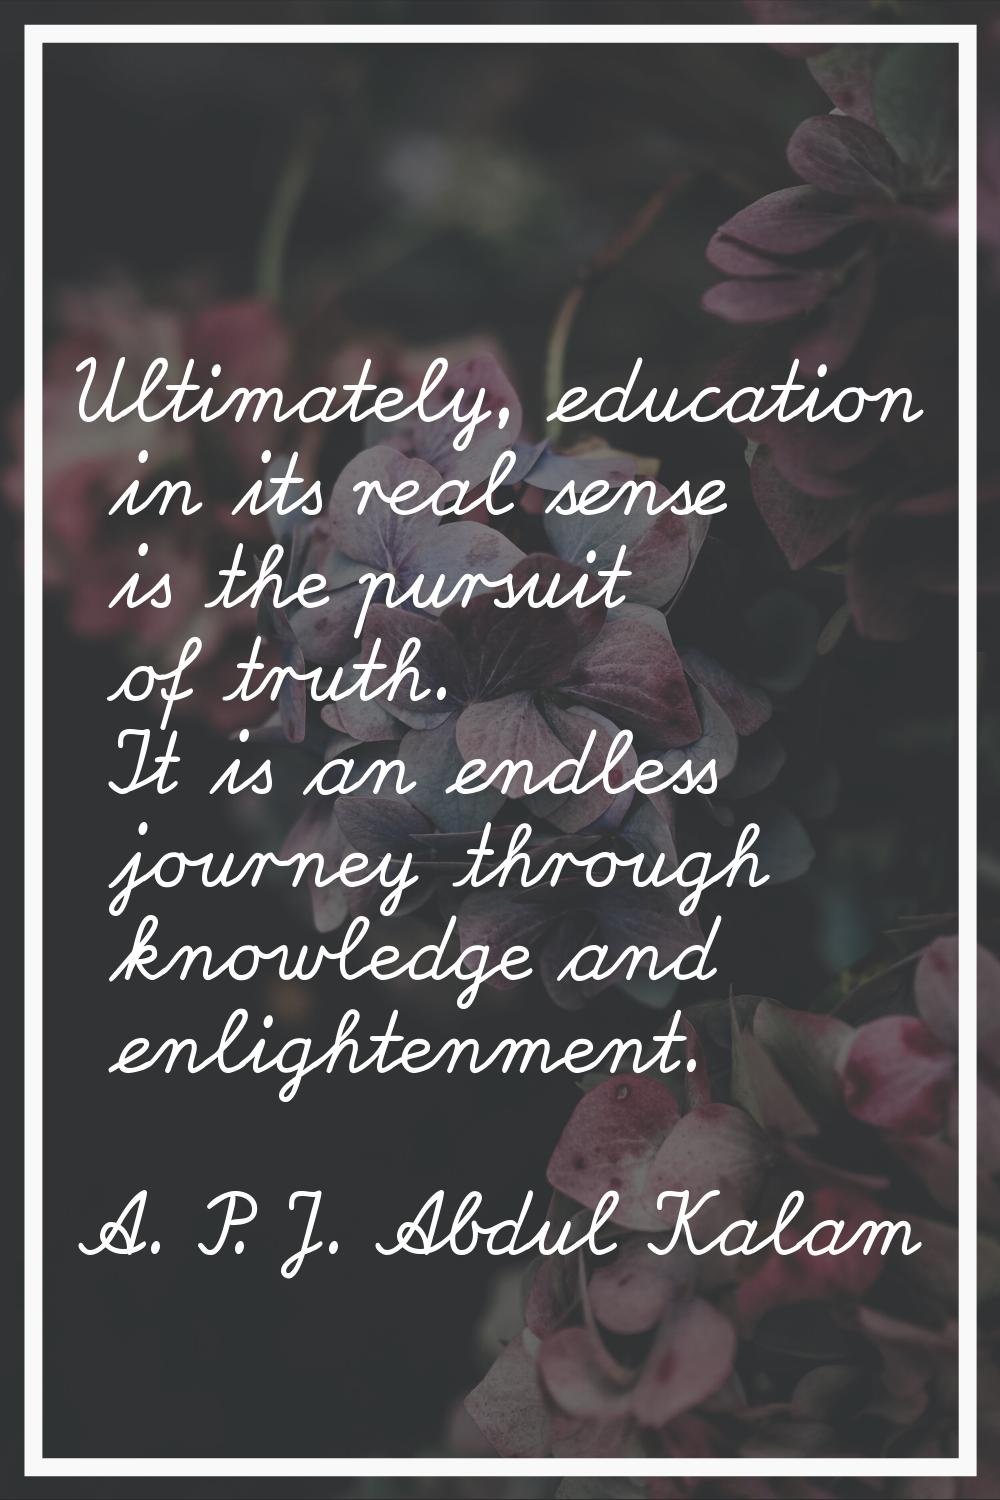 Ultimately, education in its real sense is the pursuit of truth. It is an endless journey through k